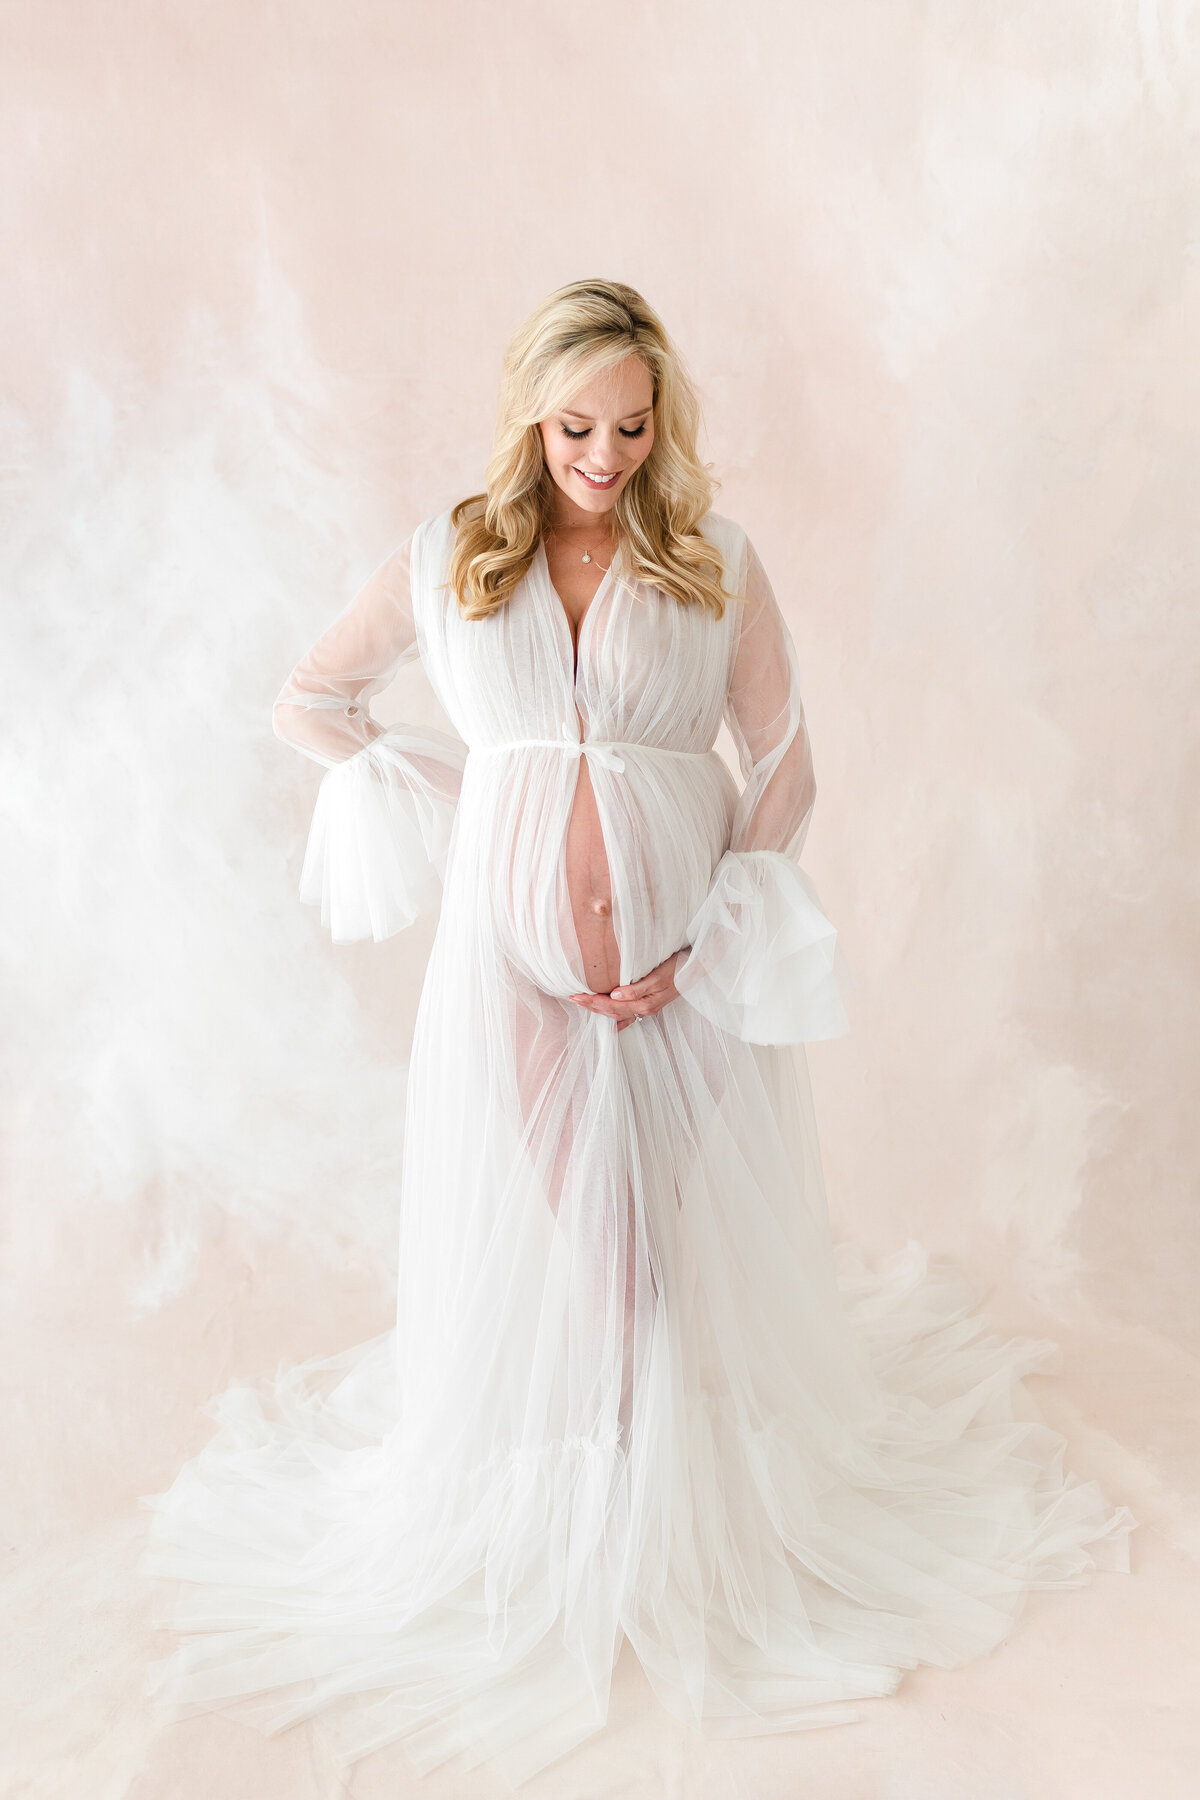 A stunning Northern Virginia Maternity Photographer photo of a mama in our Warrenton studio